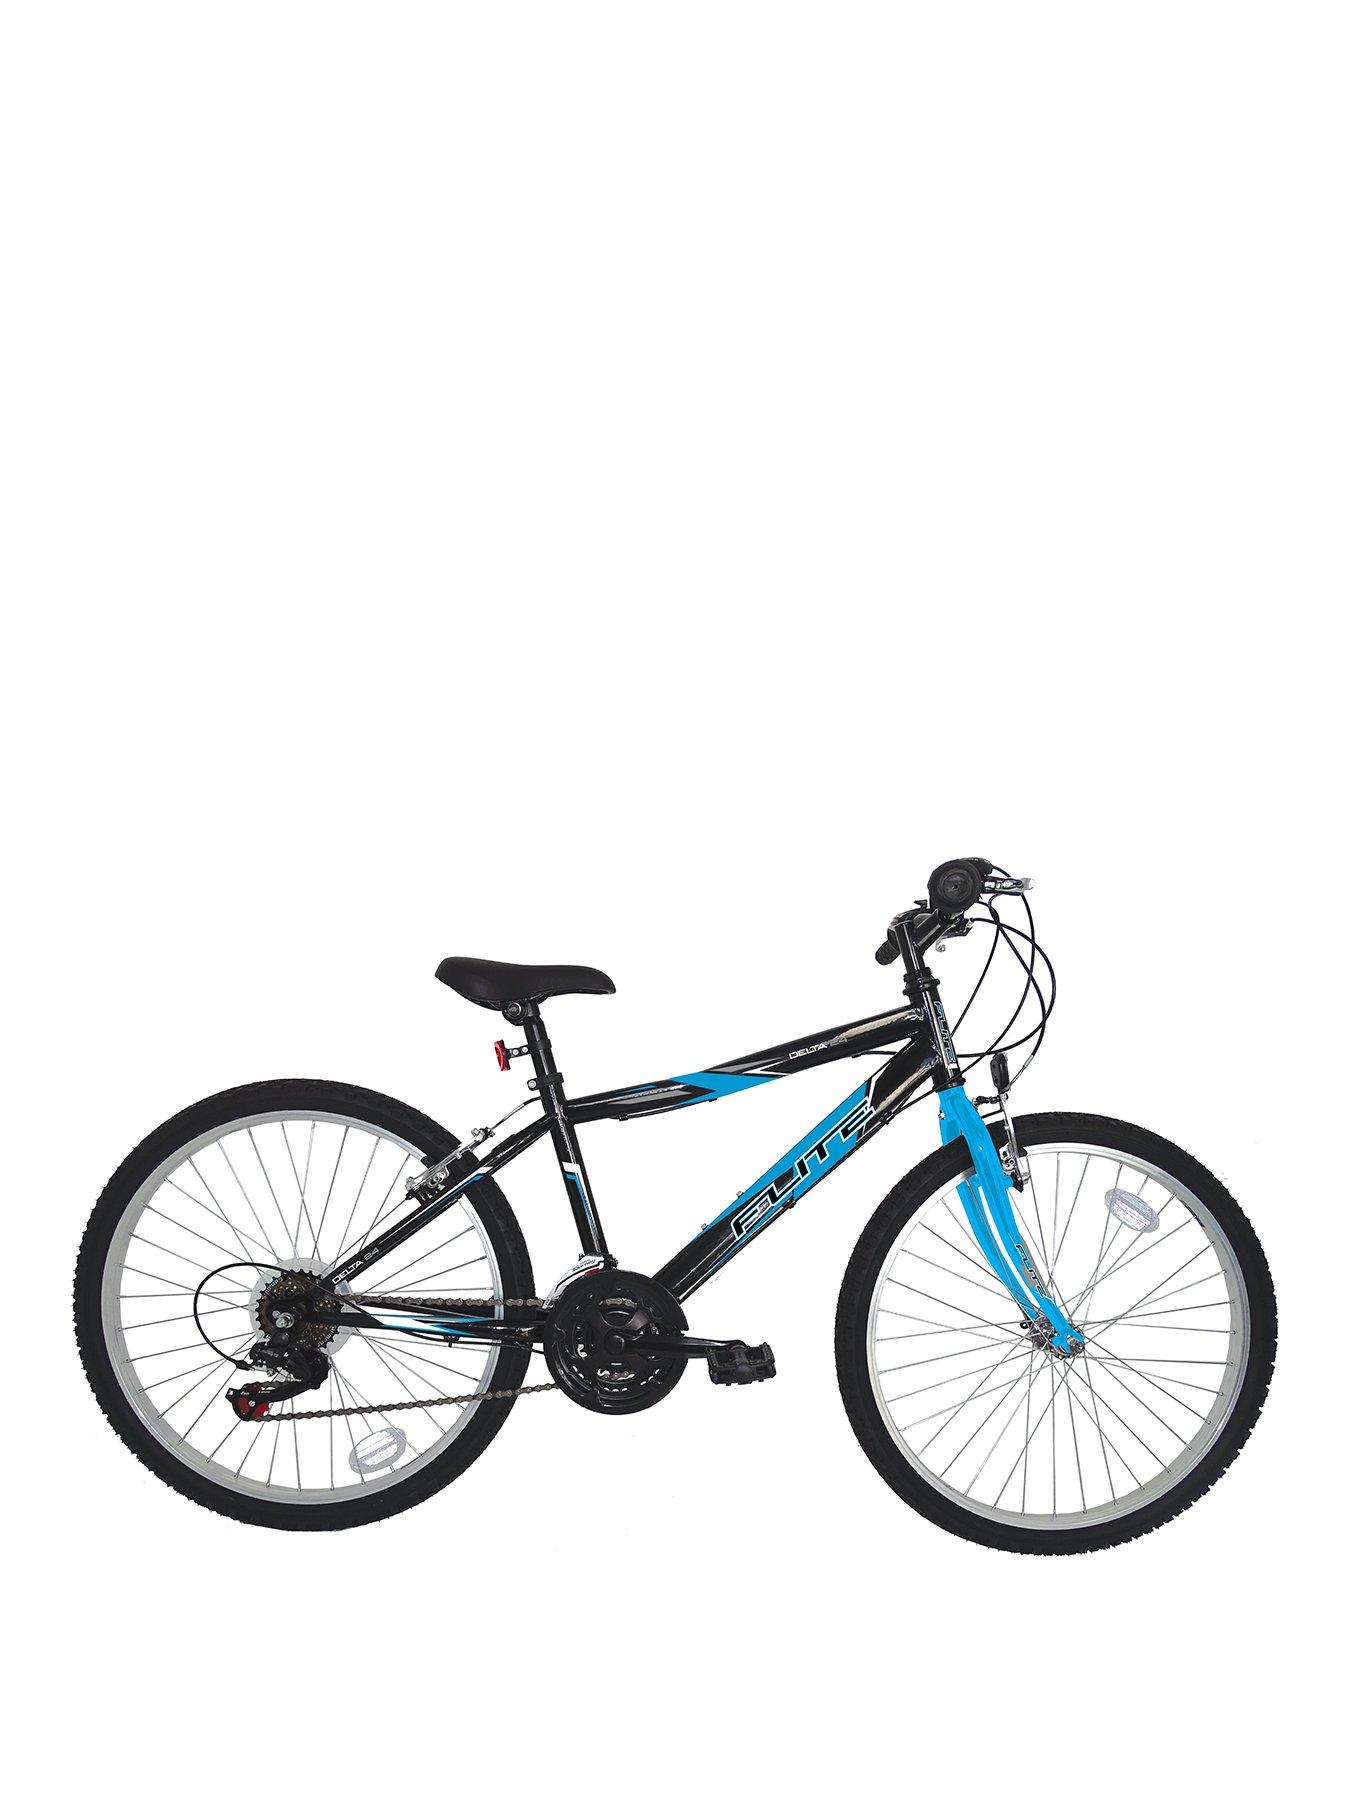 24 inch hybrid bicycle